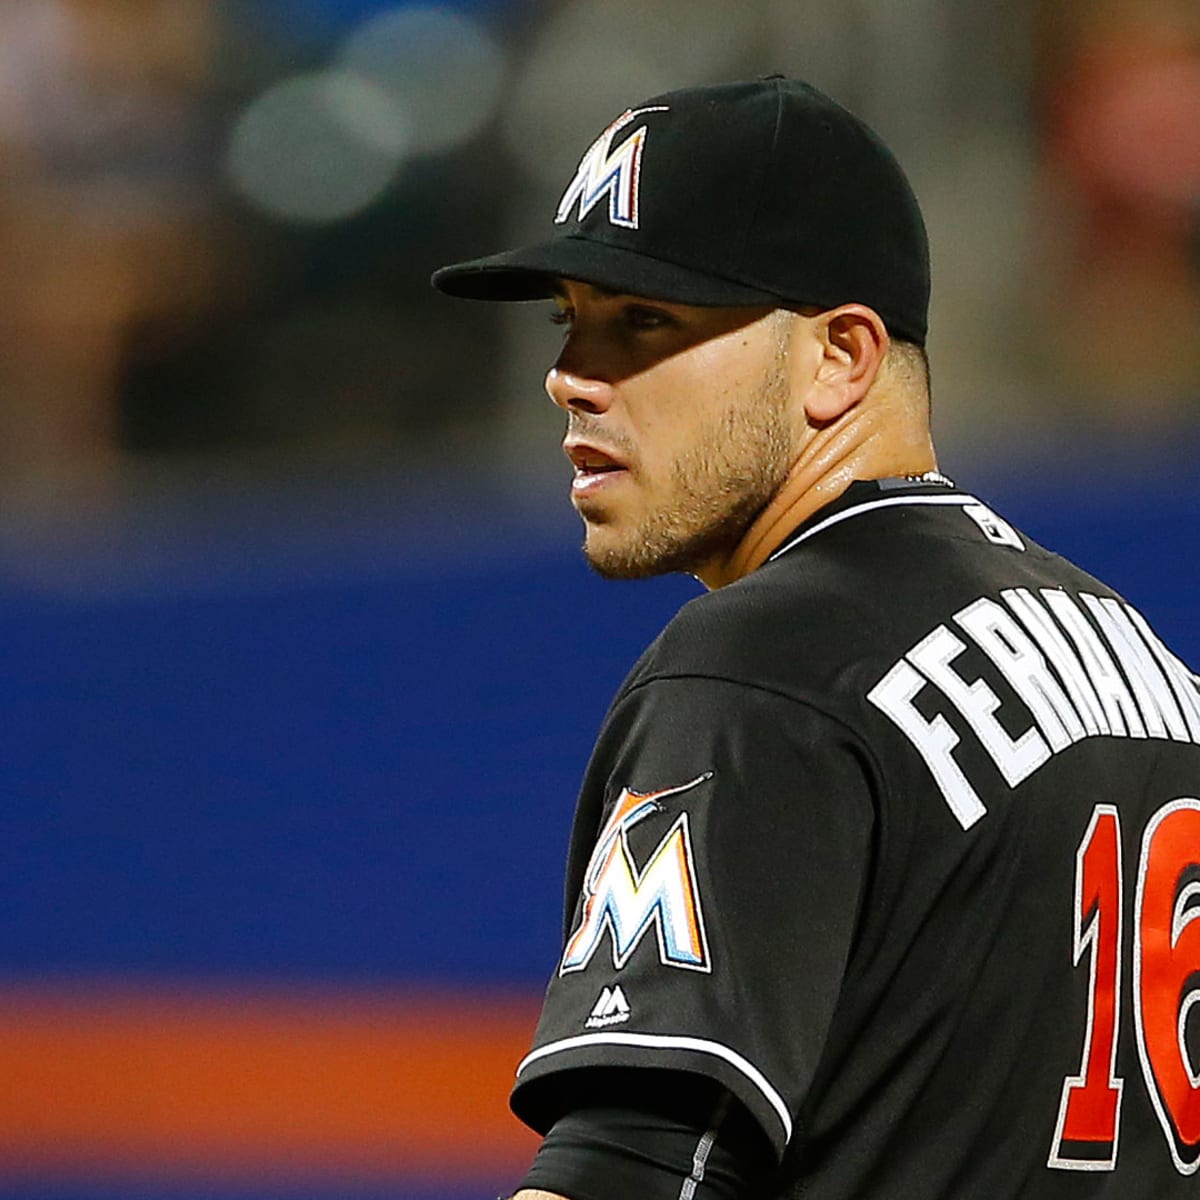 Jose Fernandez was drunk, had cocaine in system during fatal boat crash